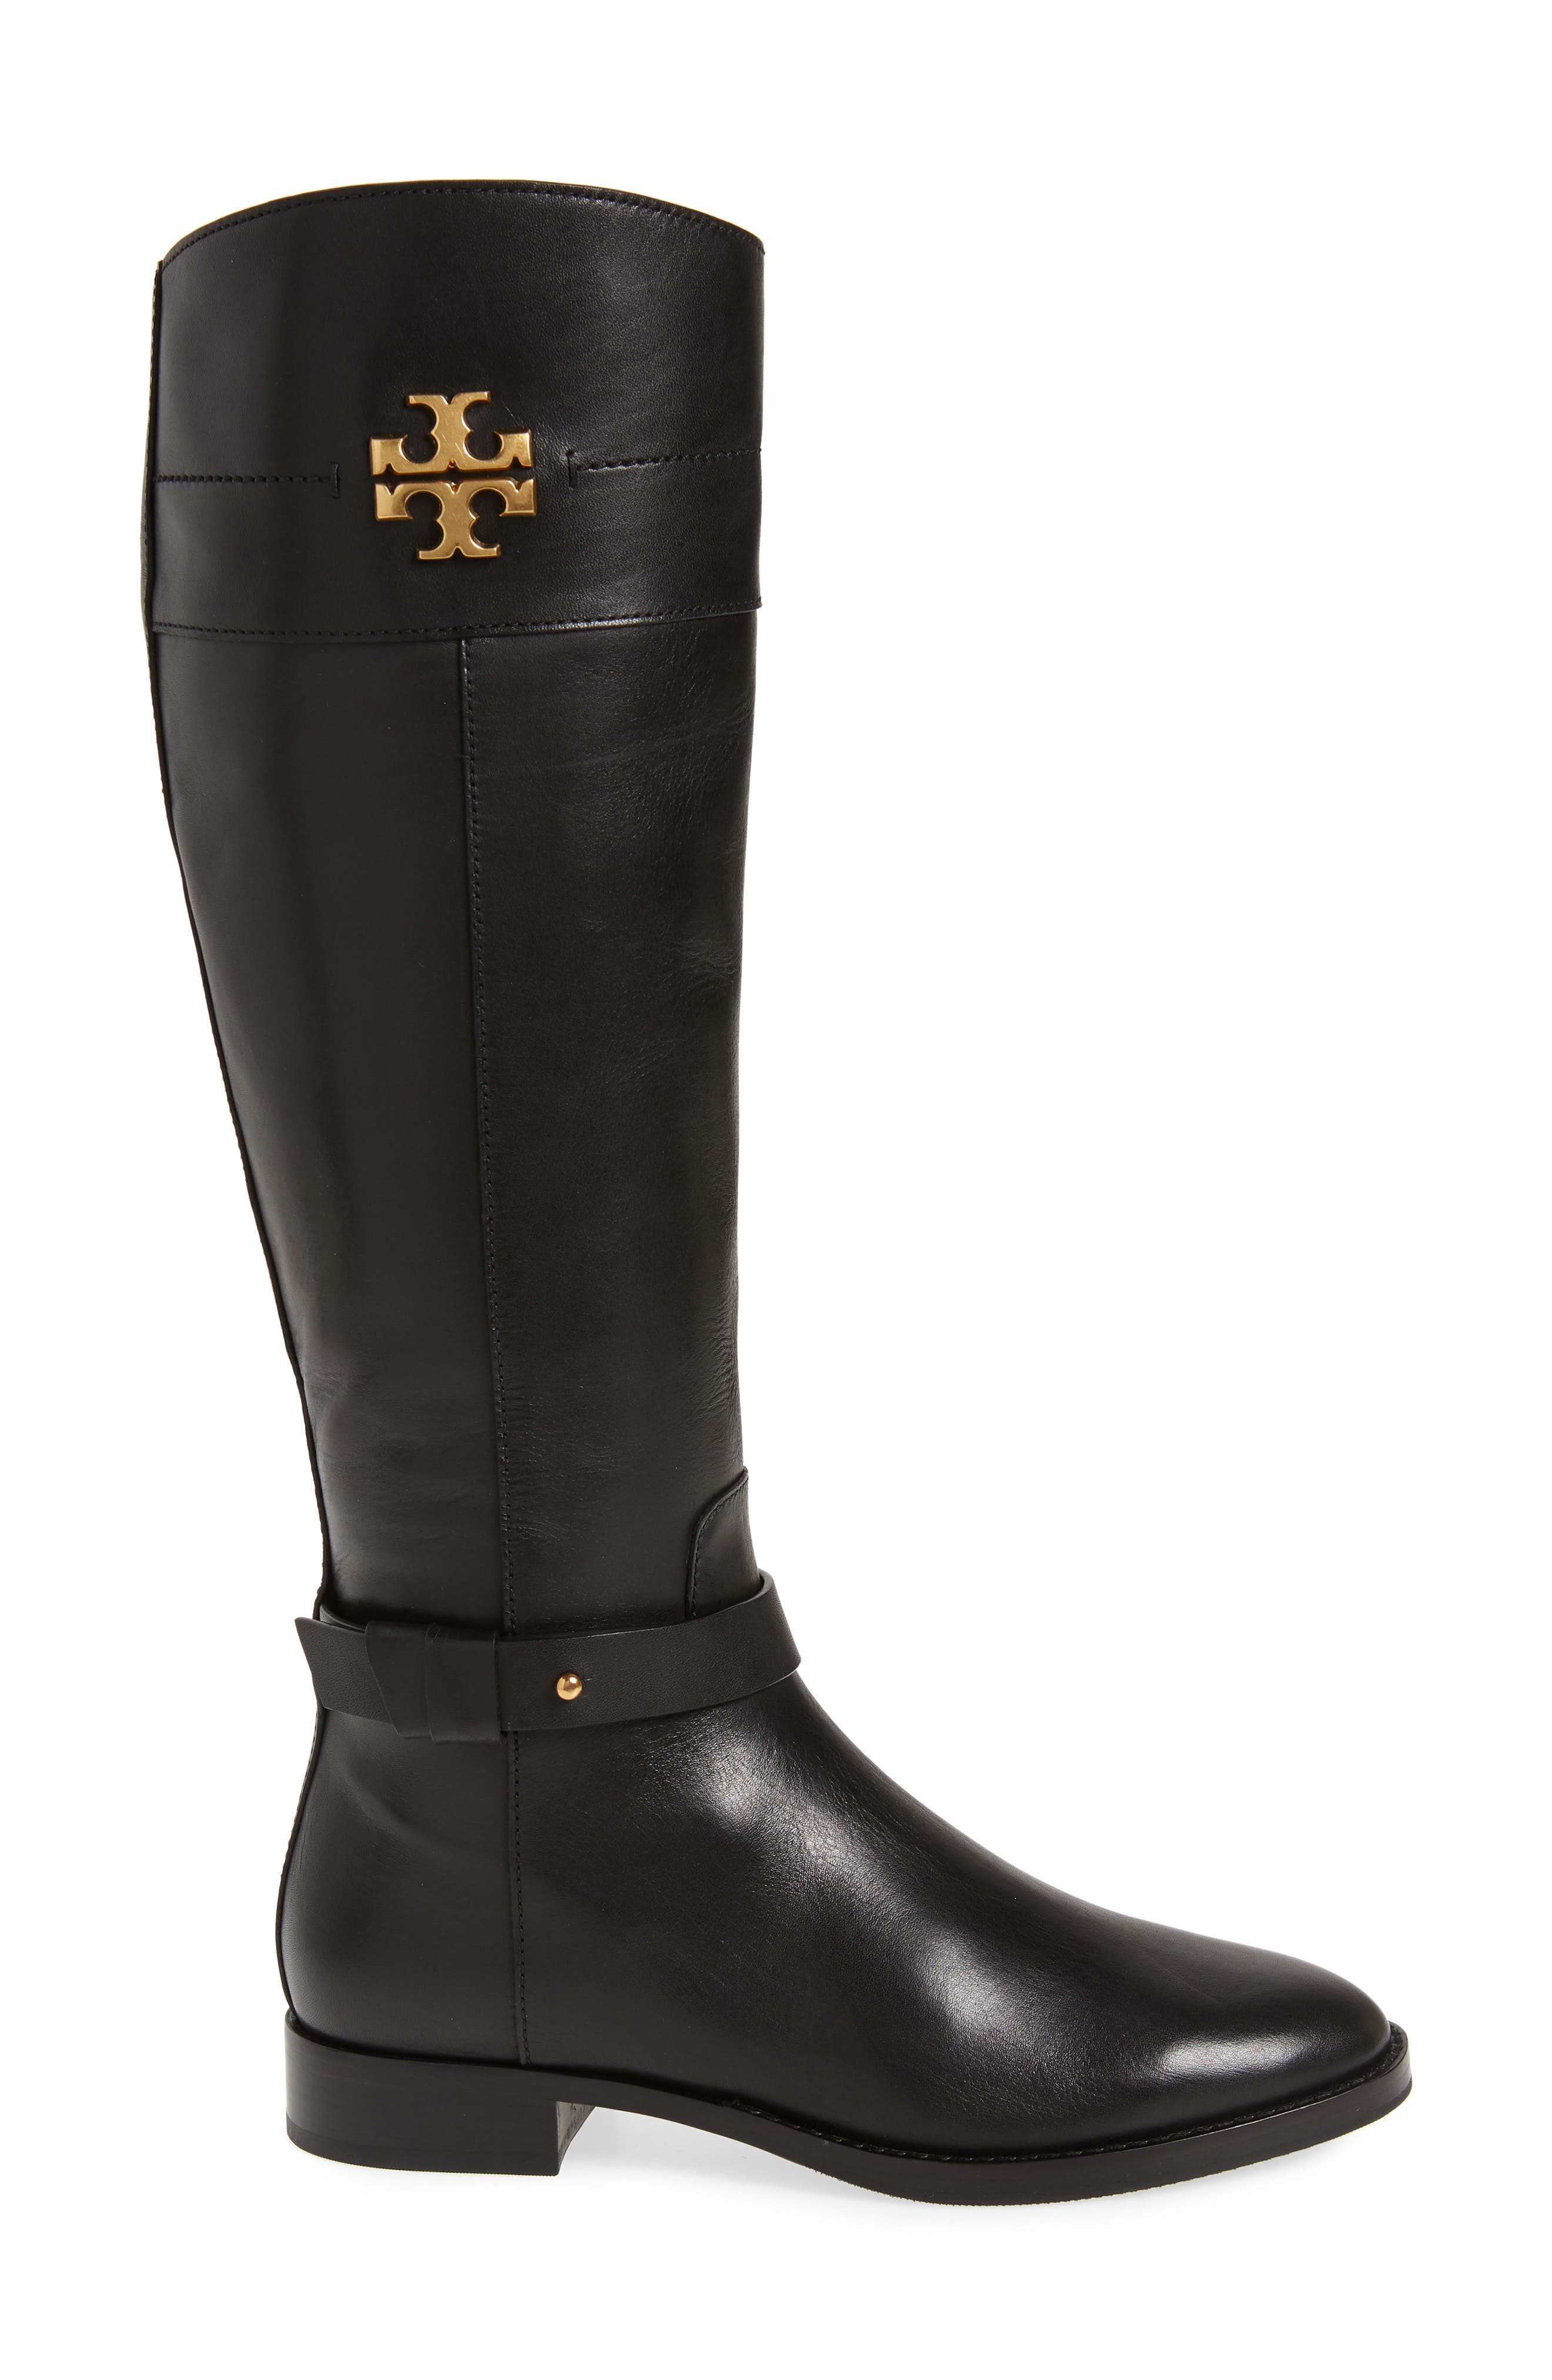 Tory Burch | Everly Knee High Boot | Nordstrom Rack